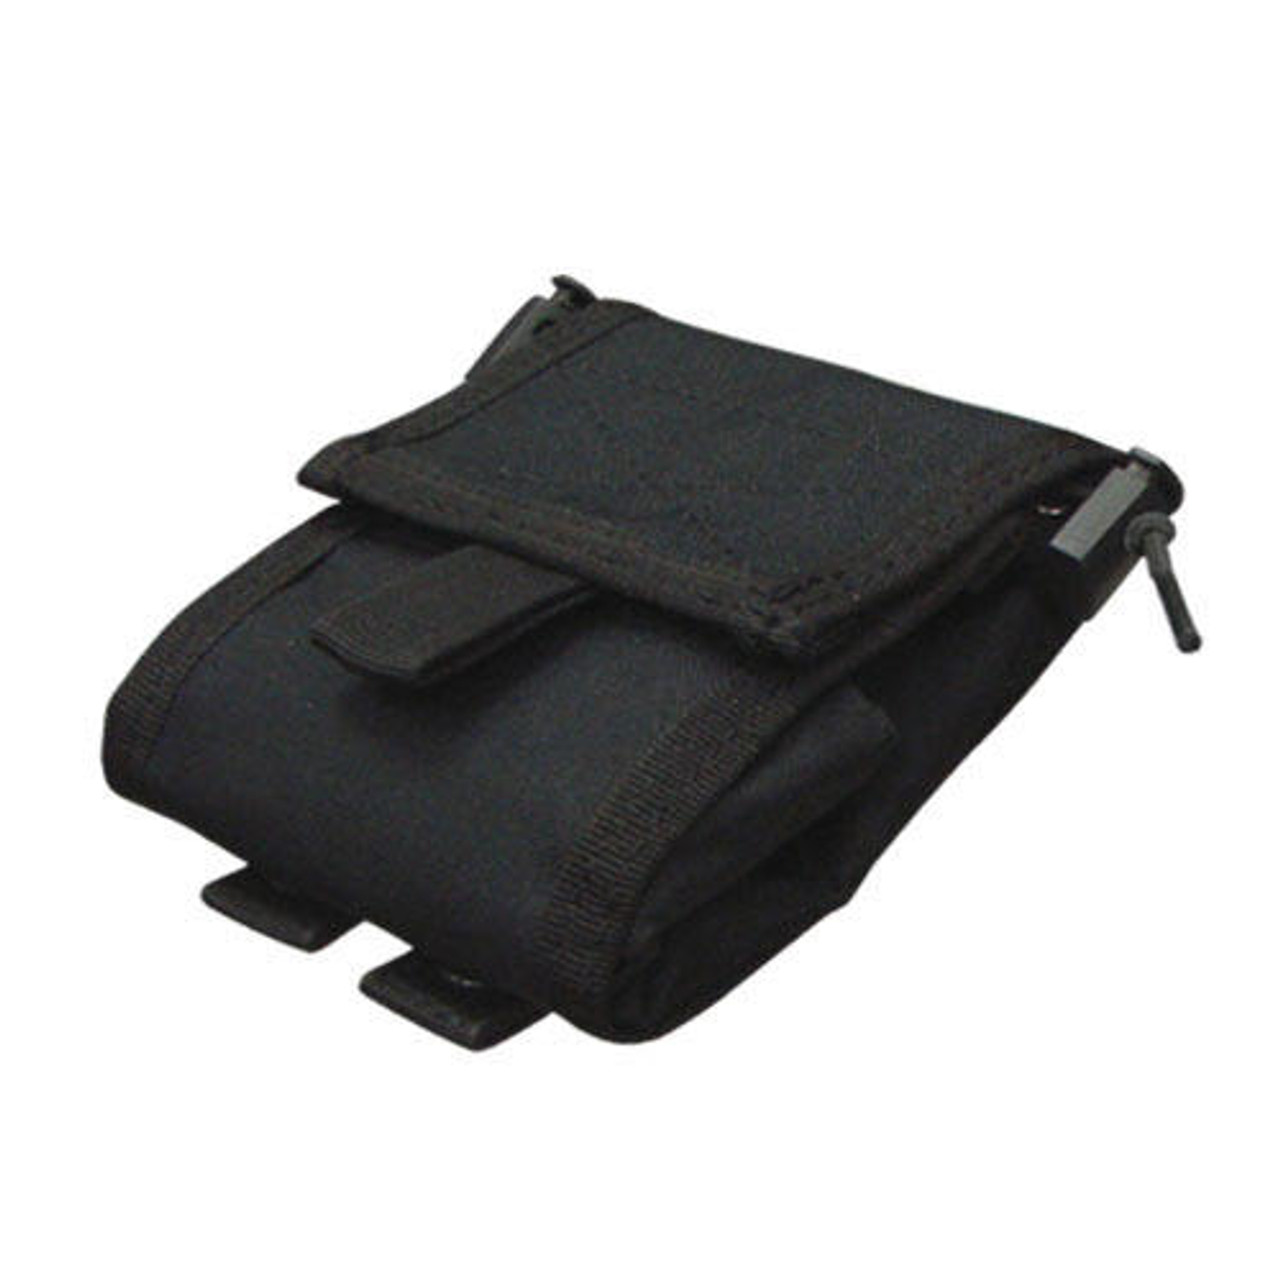 Condor Roll-Up Utility Pouch, Black